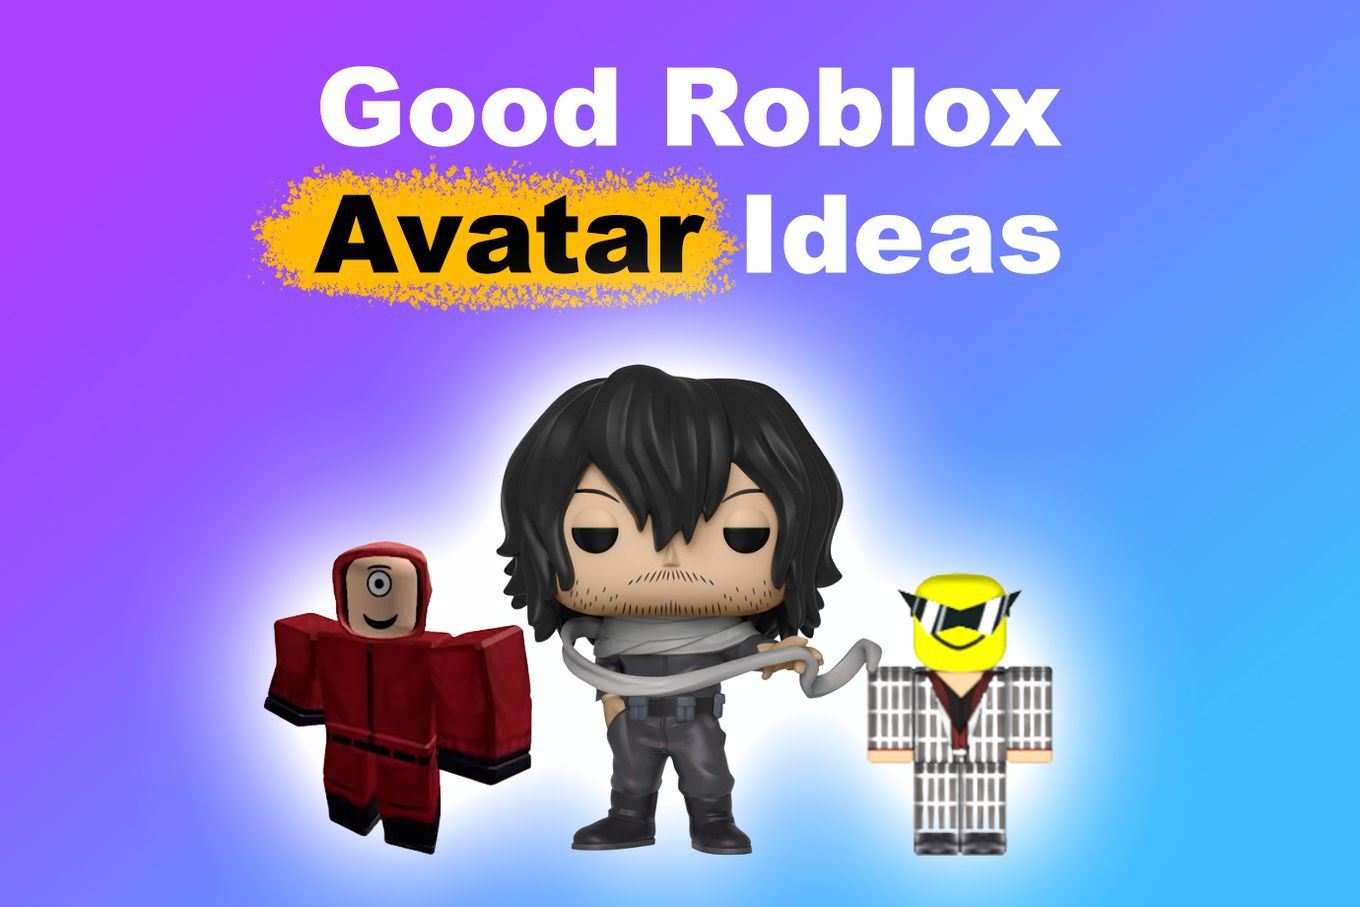 How to Create a Roblox Character in 2022 Easiest Guide  Beebom